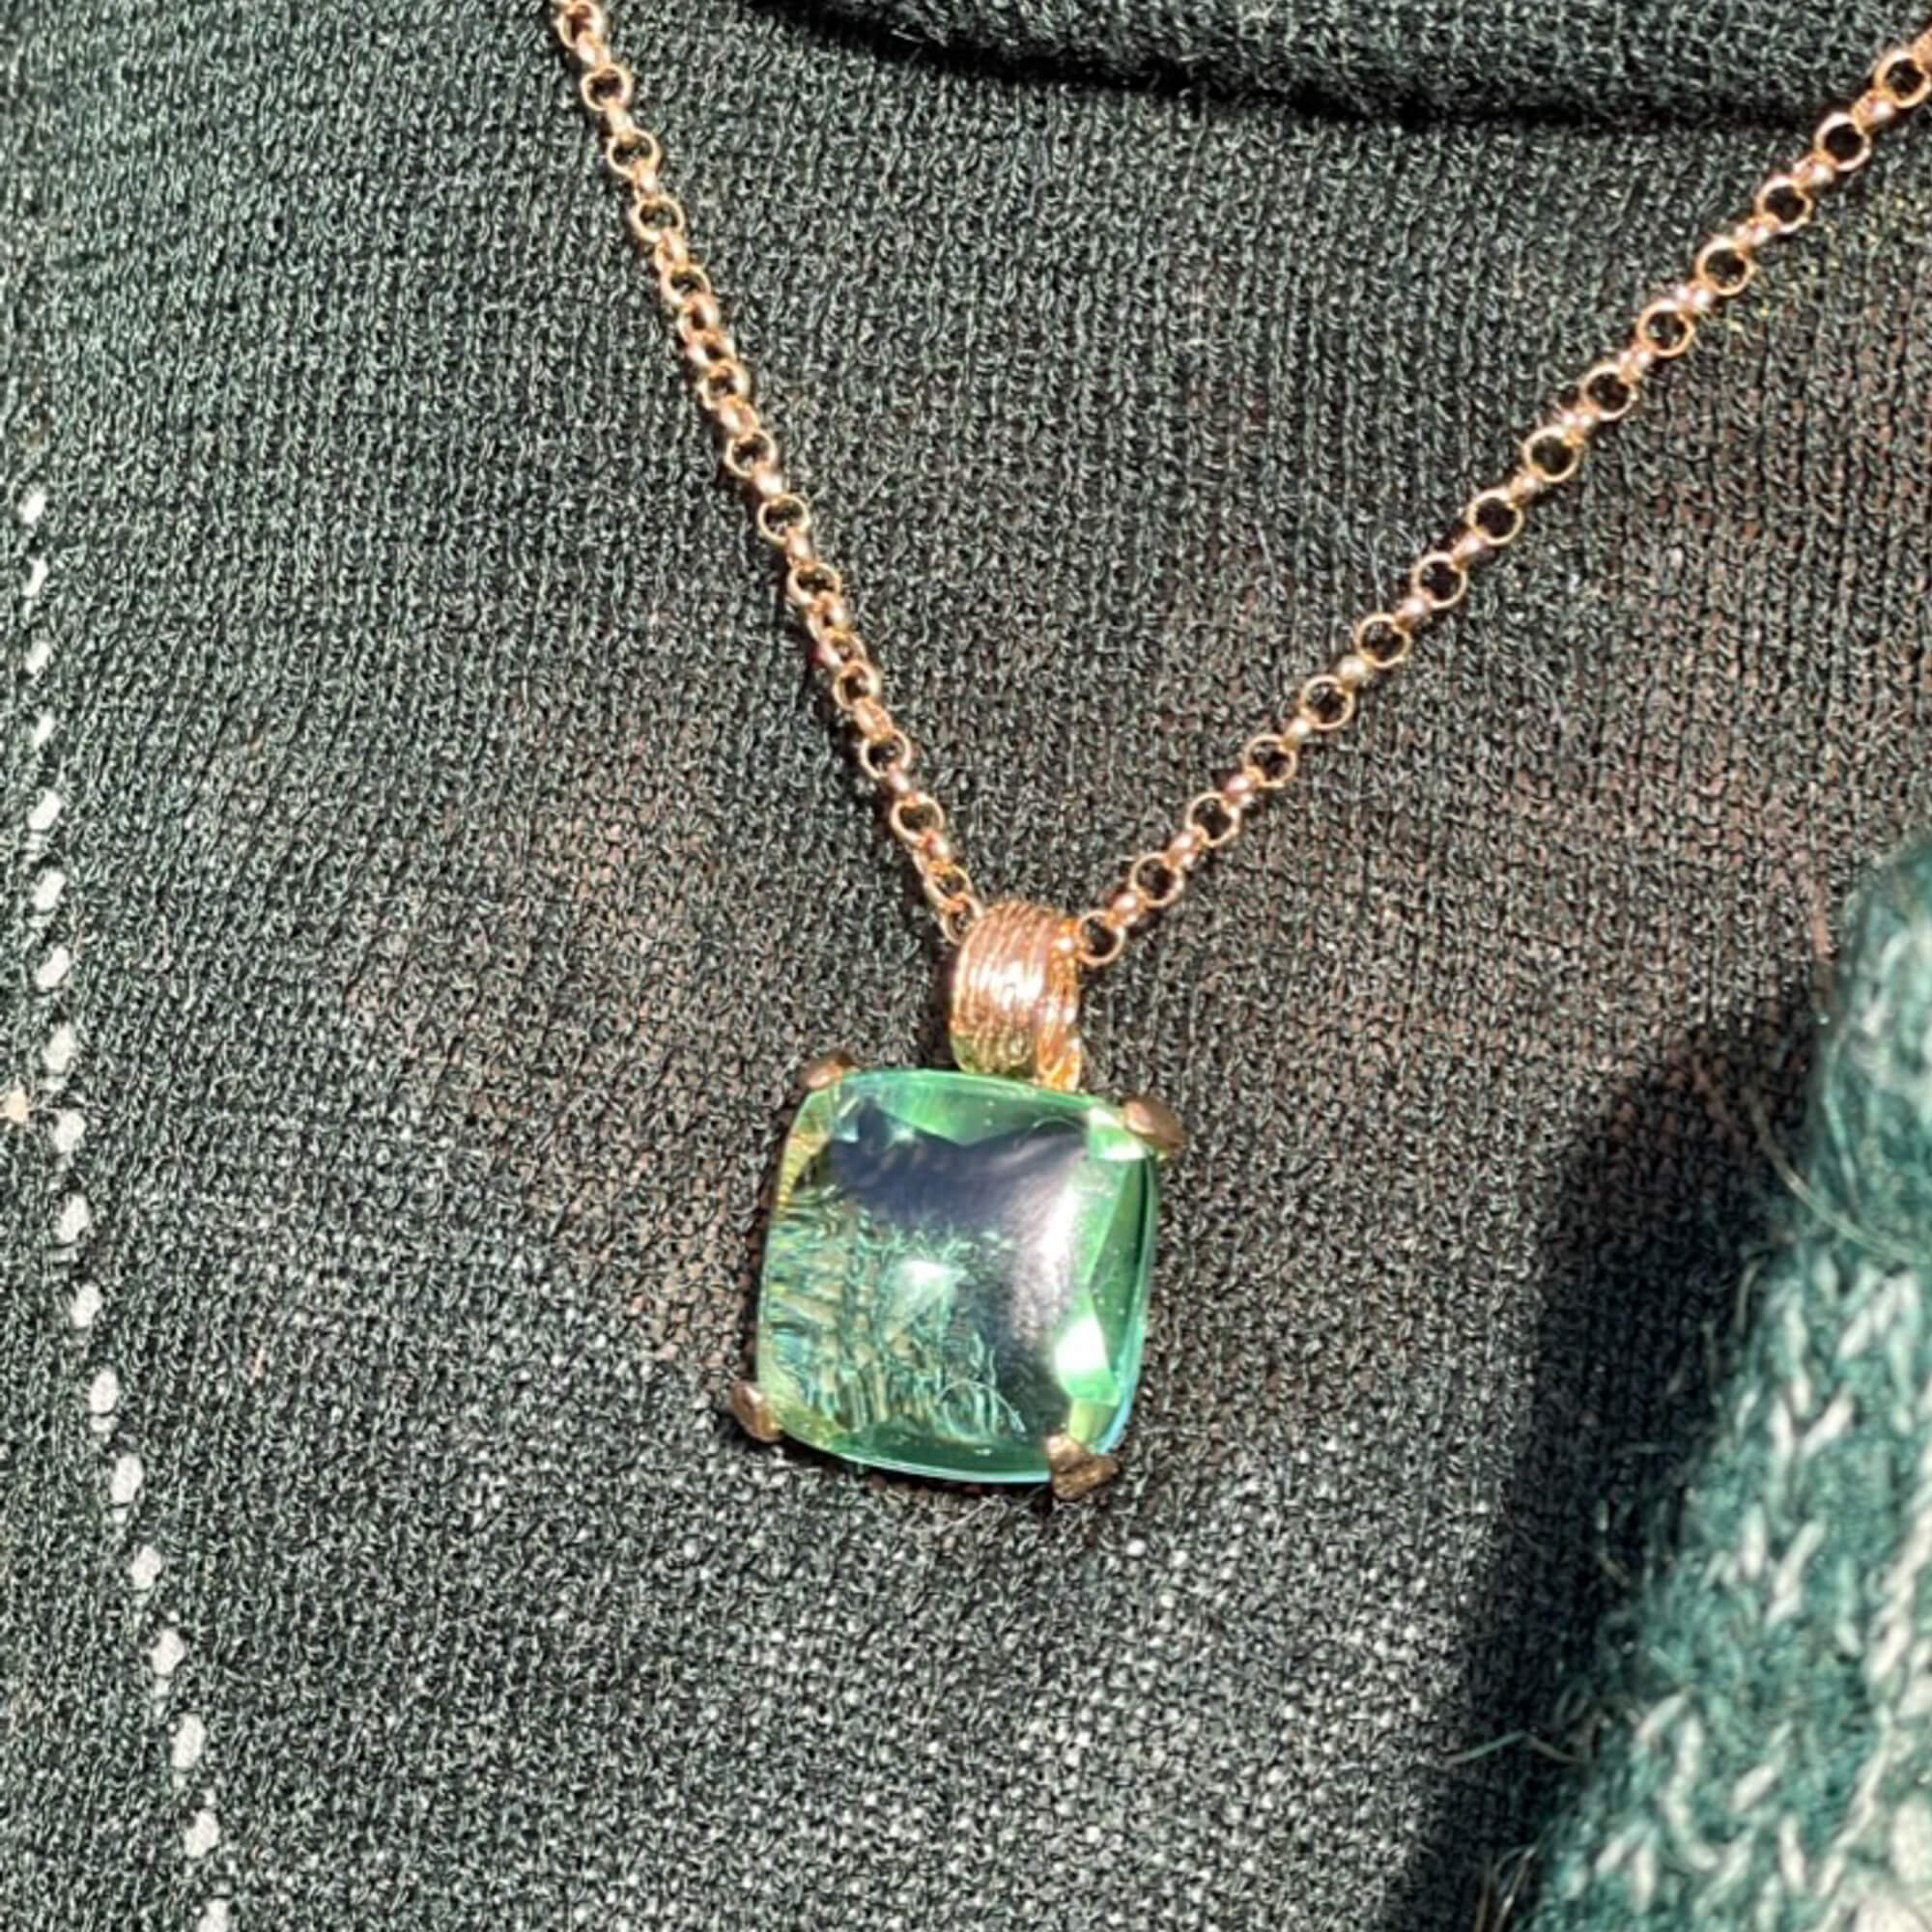 Green square-shaped pendant with gilt chain